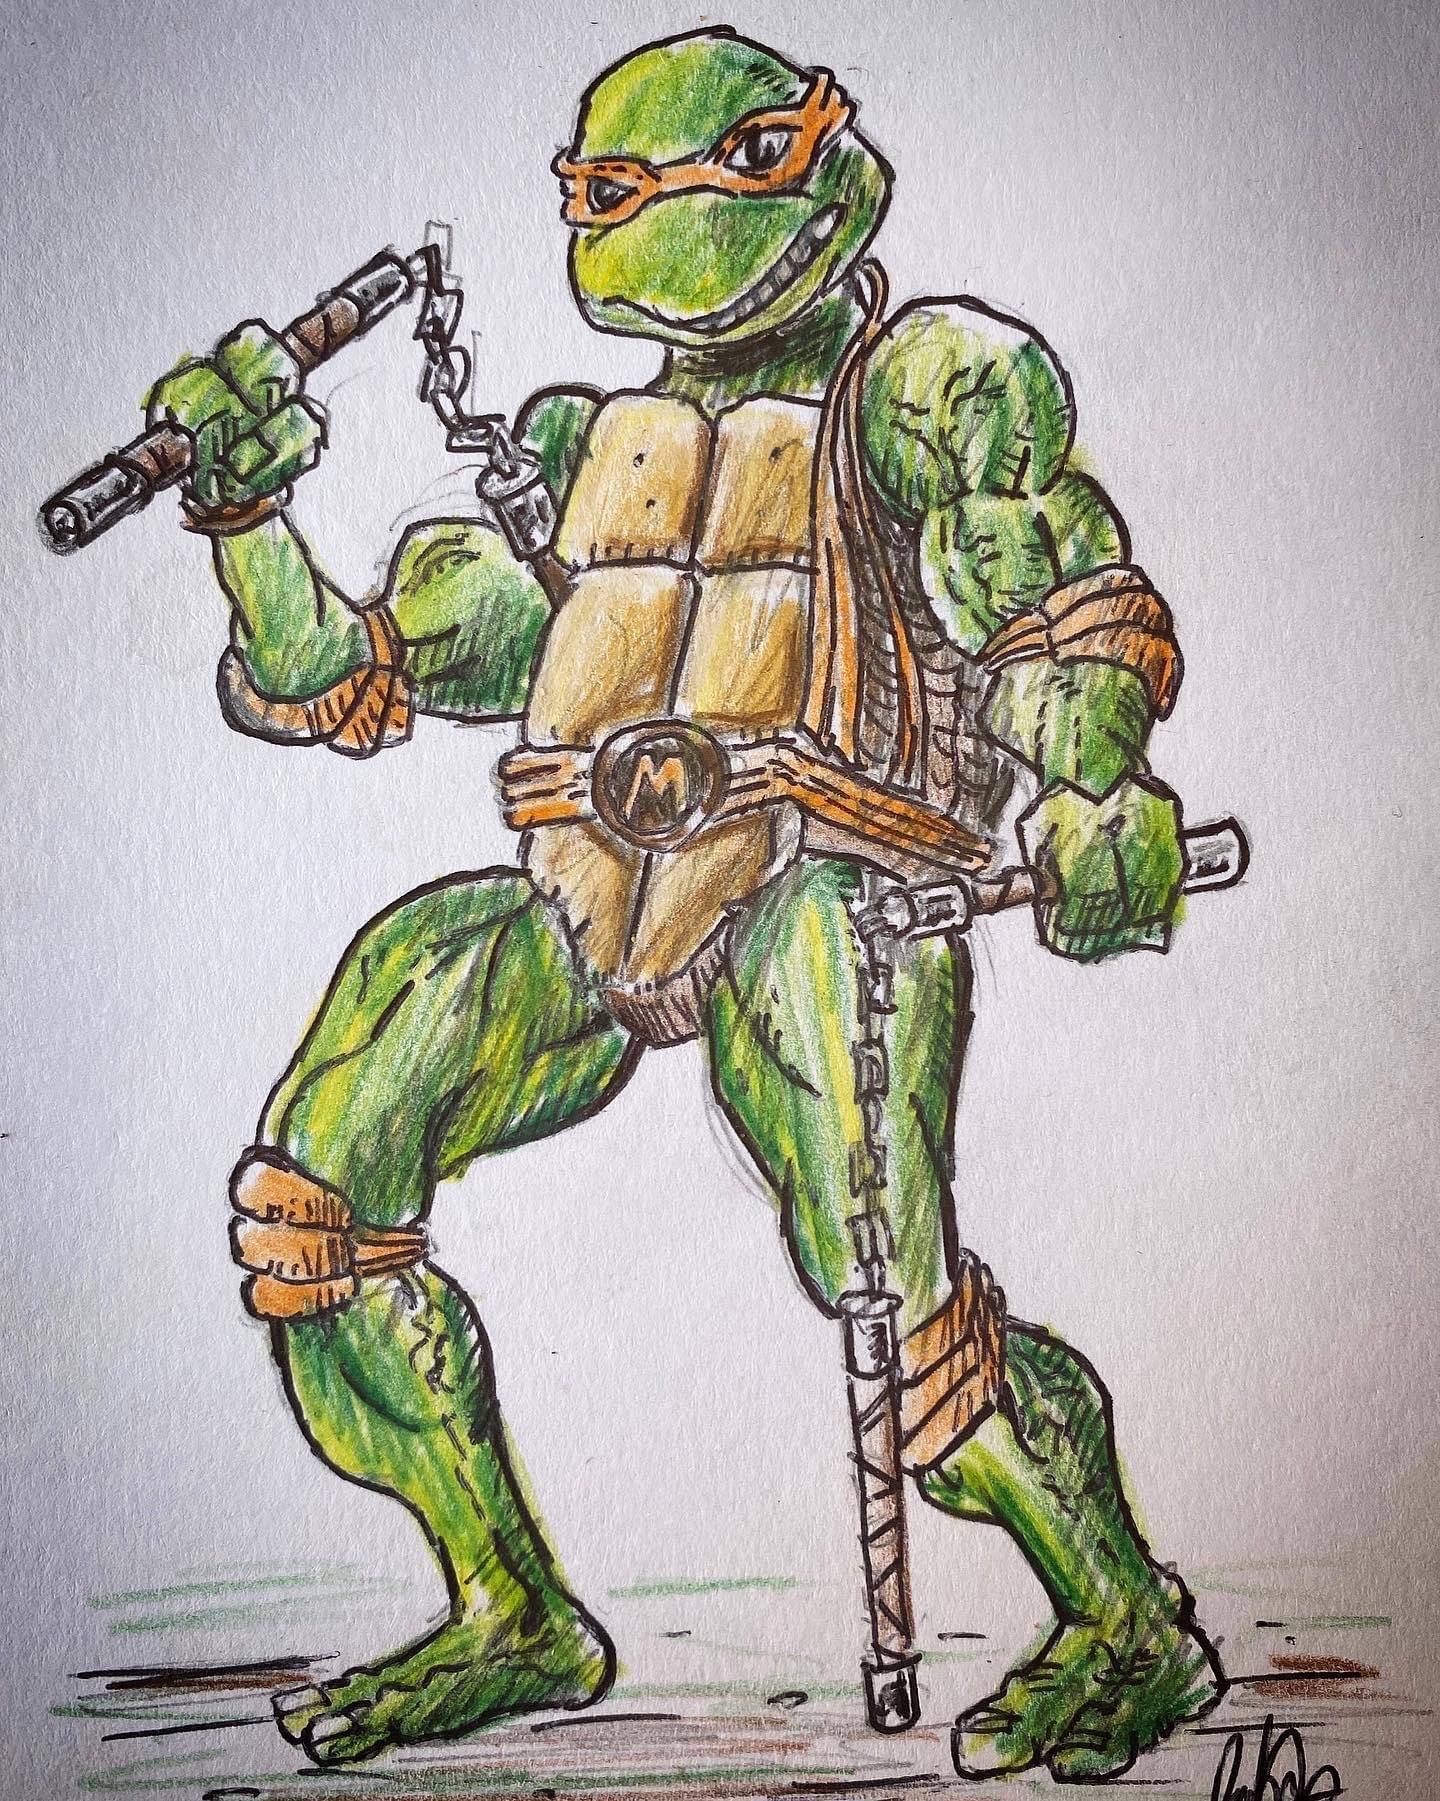 A colour drawing of Michelangelo from The Teenage Mutant Ninja Turtles